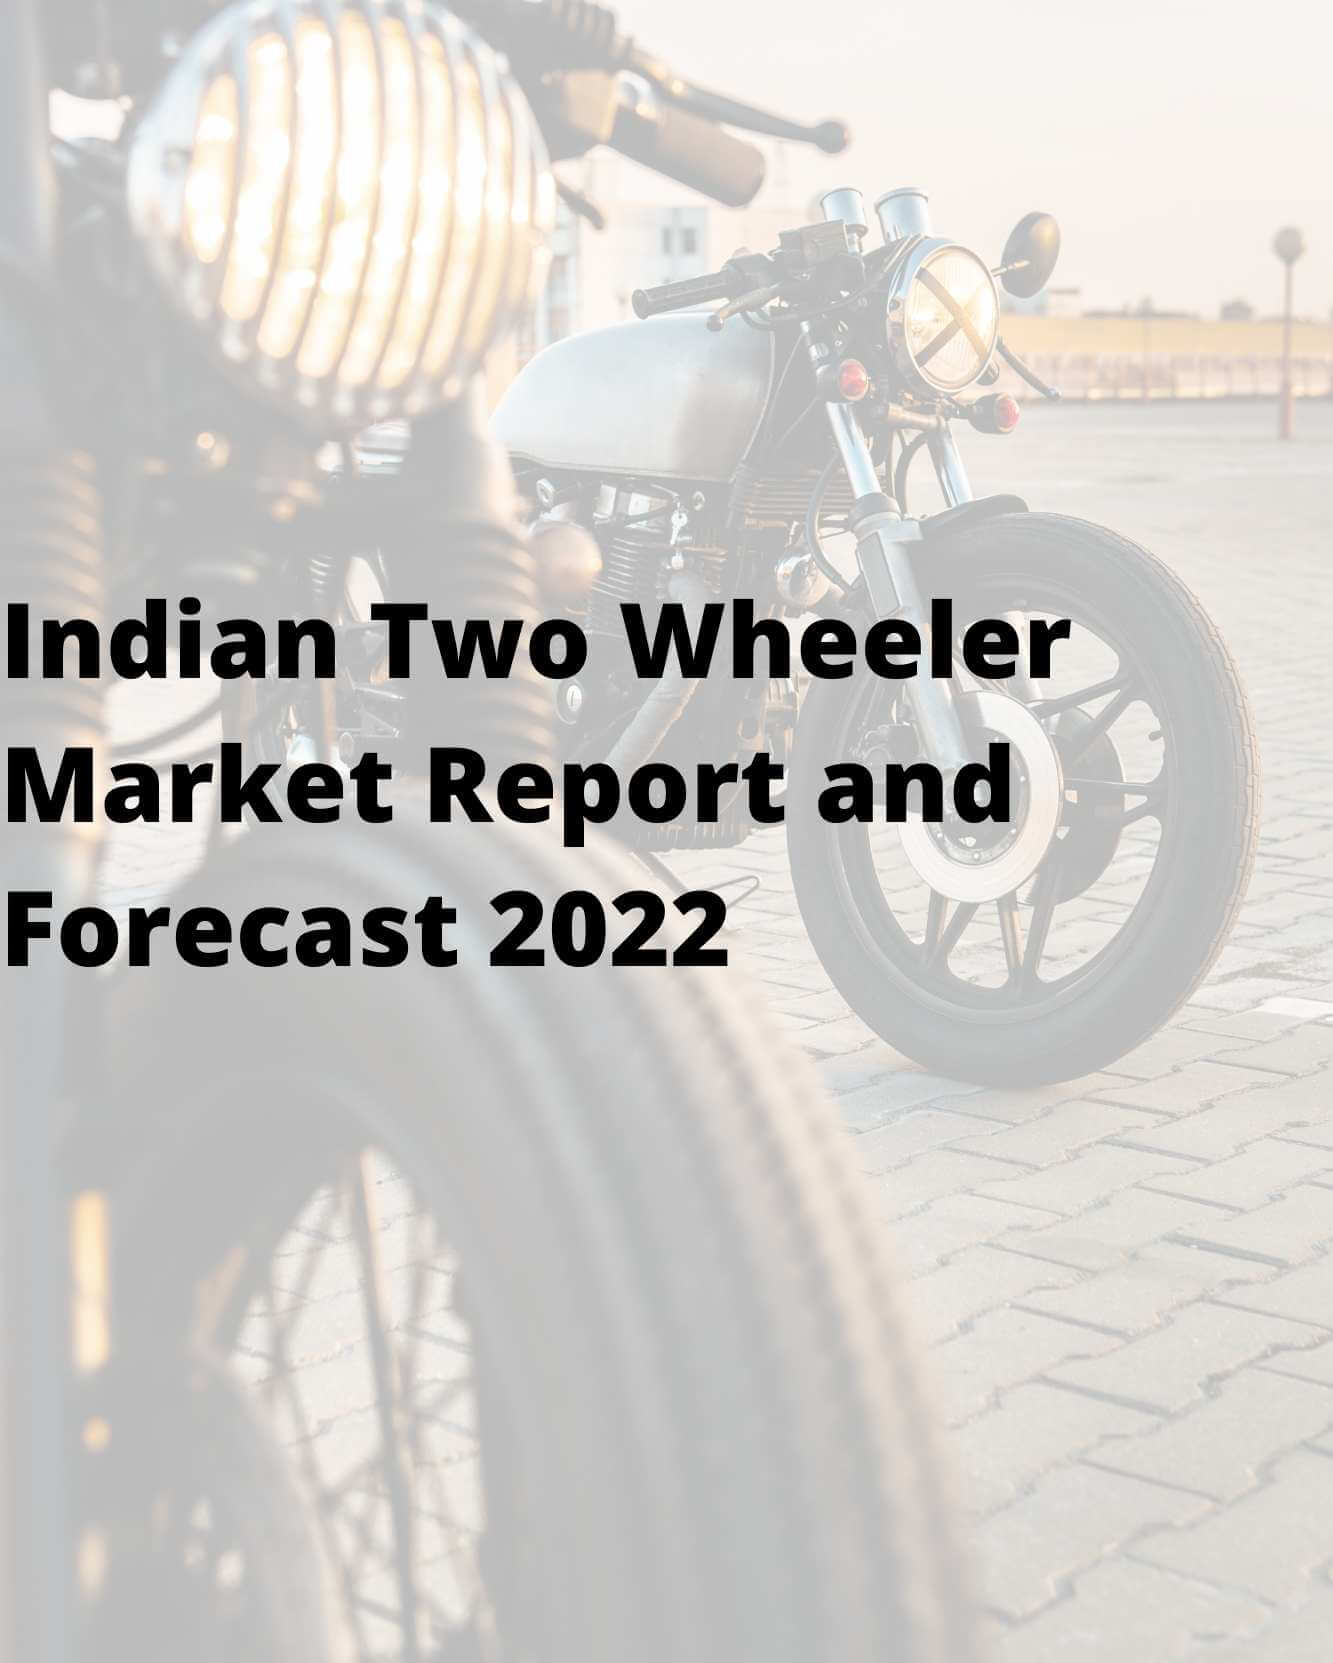 Indian Two Wheeler Market Report and Forecast 2022